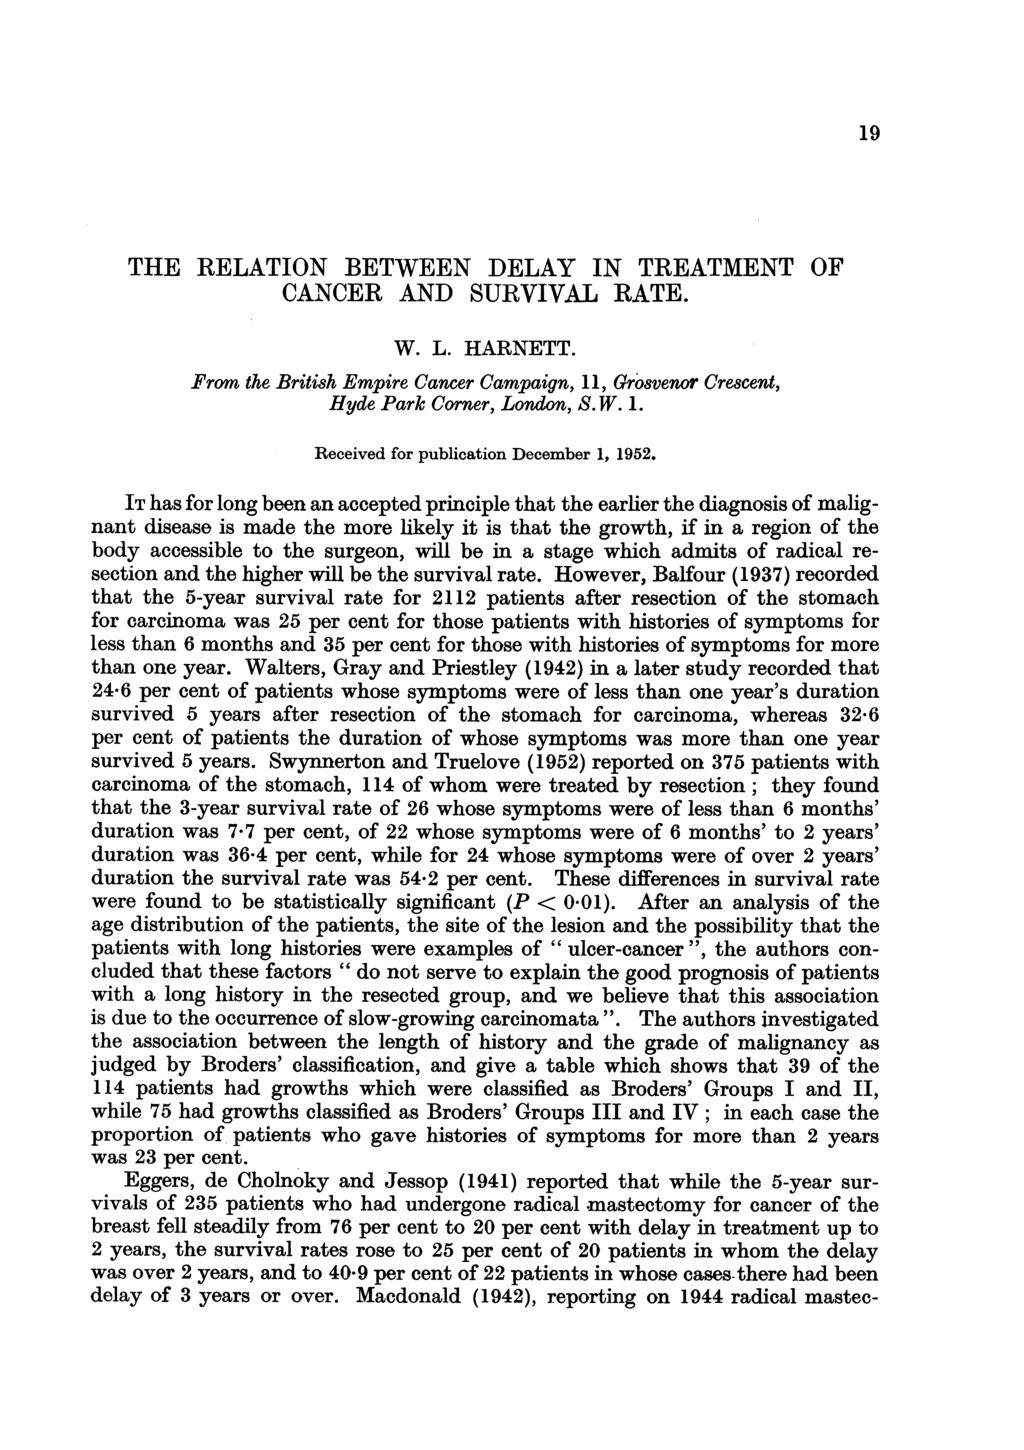 19 THE RELATION BETWEEN DELAY IN TREATMENT OF CANCER AND SURVIVAL RATE. W. L. HARNETT. From the British Empire Cancer Campaign, 11, Grosvenor Crescent, Hyde Park Corner, London, S. W. 1. Received for publication December 1, 1952.